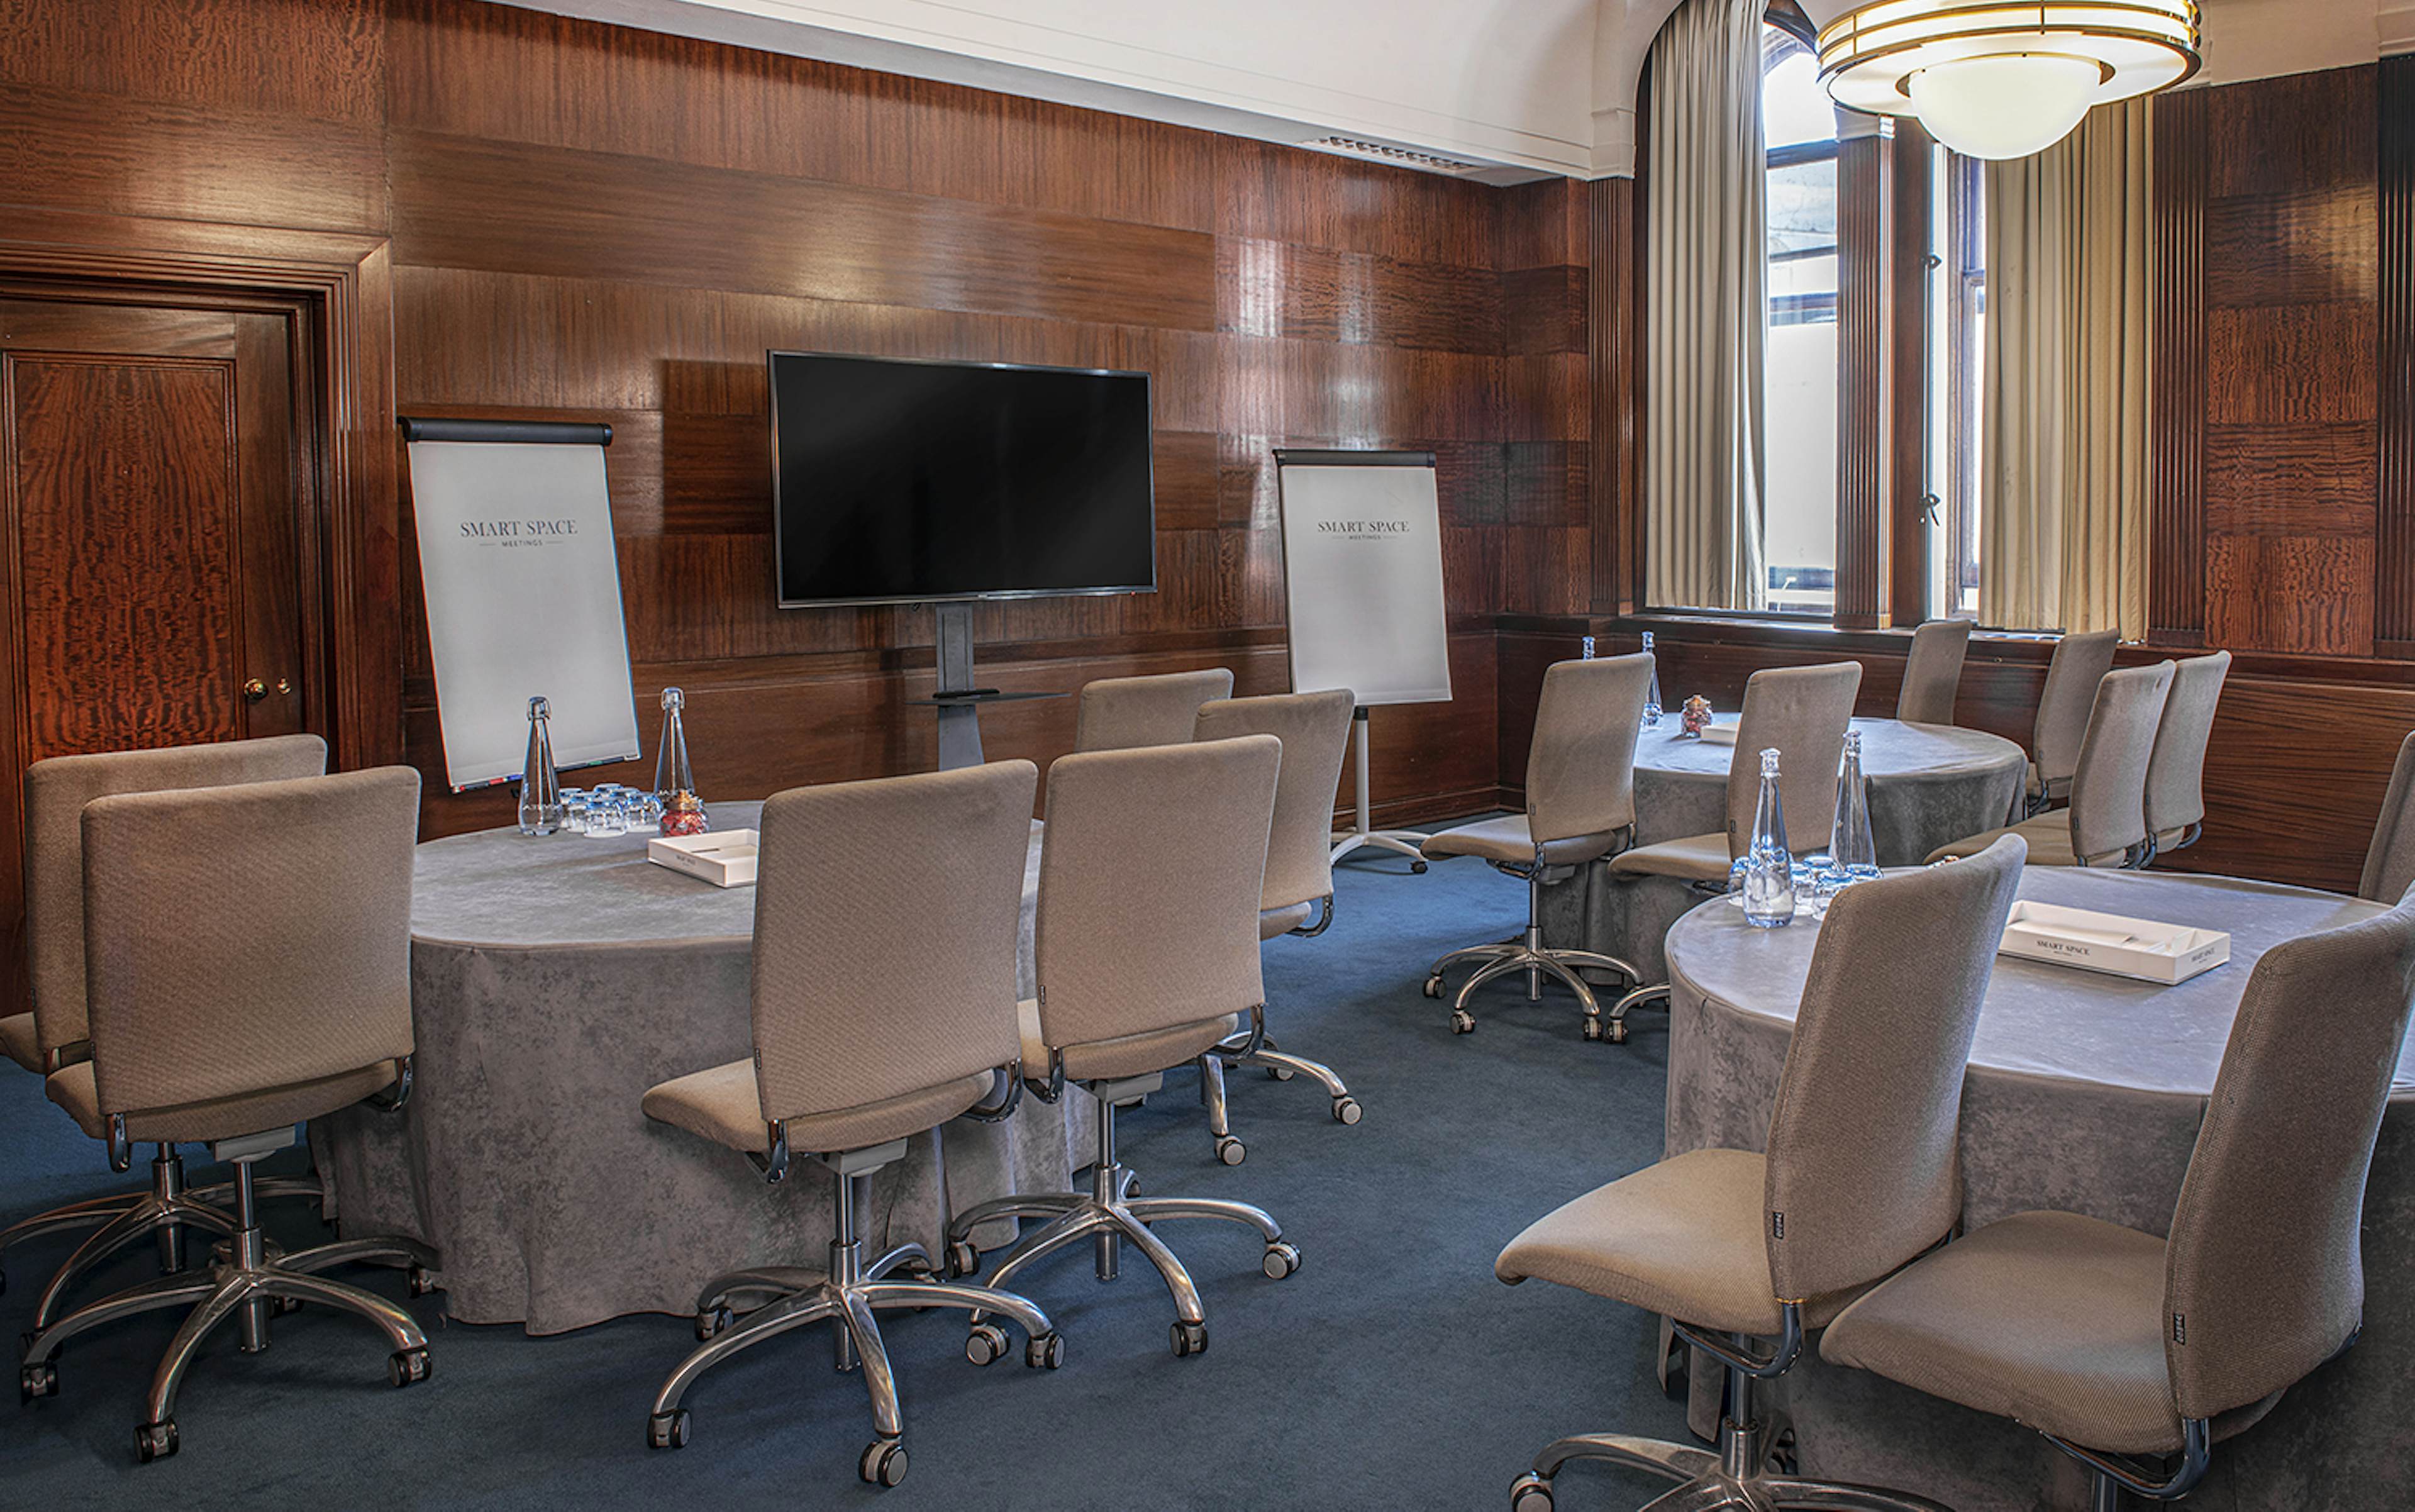 De Vere Holborn Bars - Small Sized Meeting Room image 1